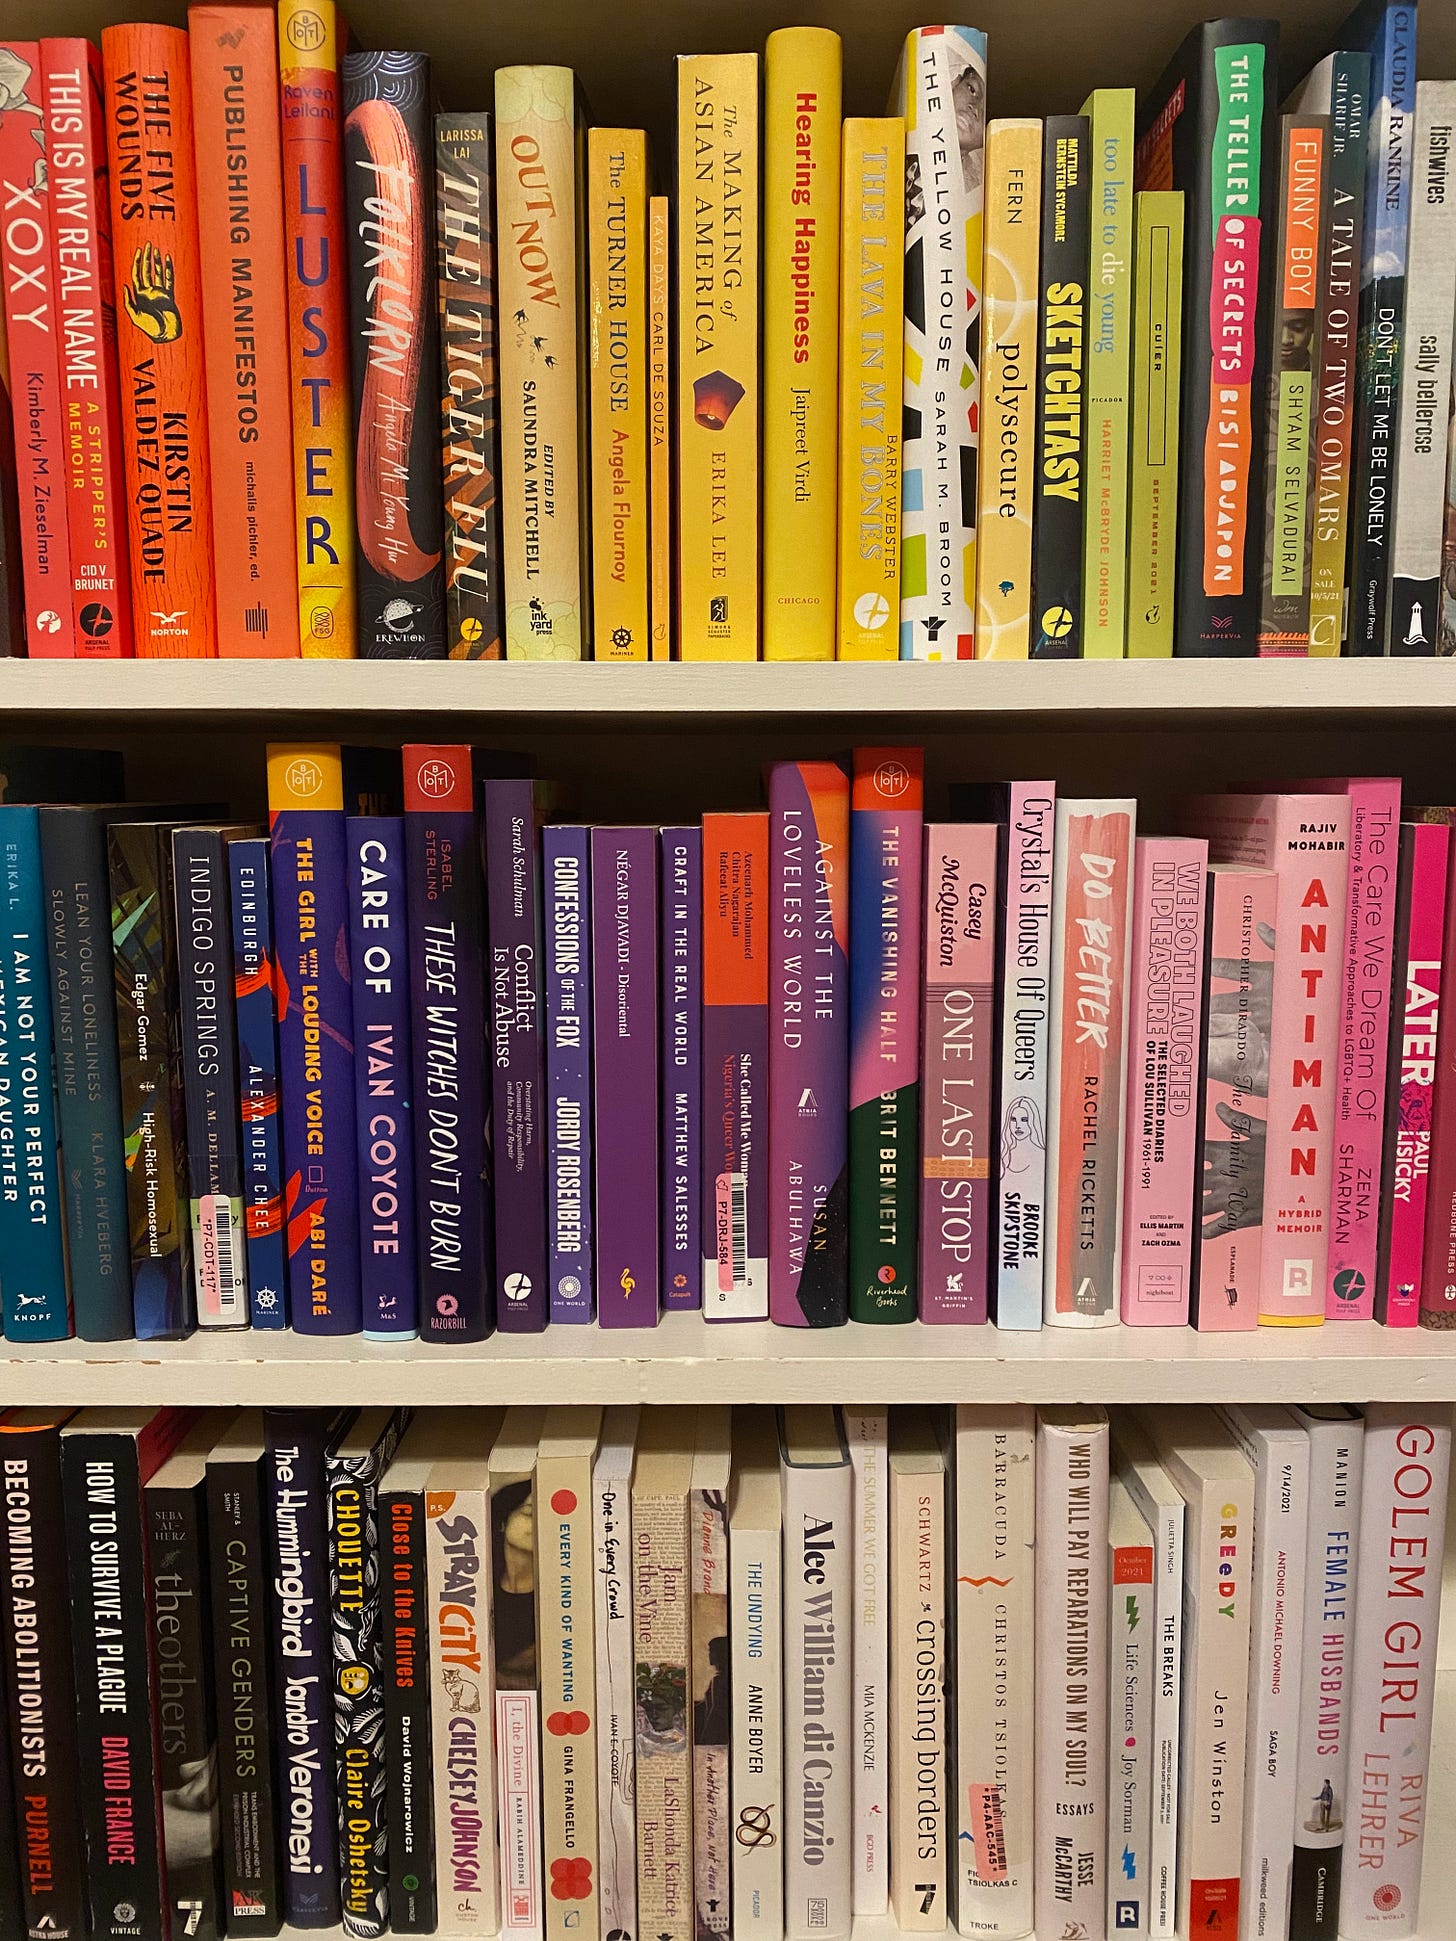 Three shelves of books, the spines arranged in the colors of a rainbow from top to bottom.